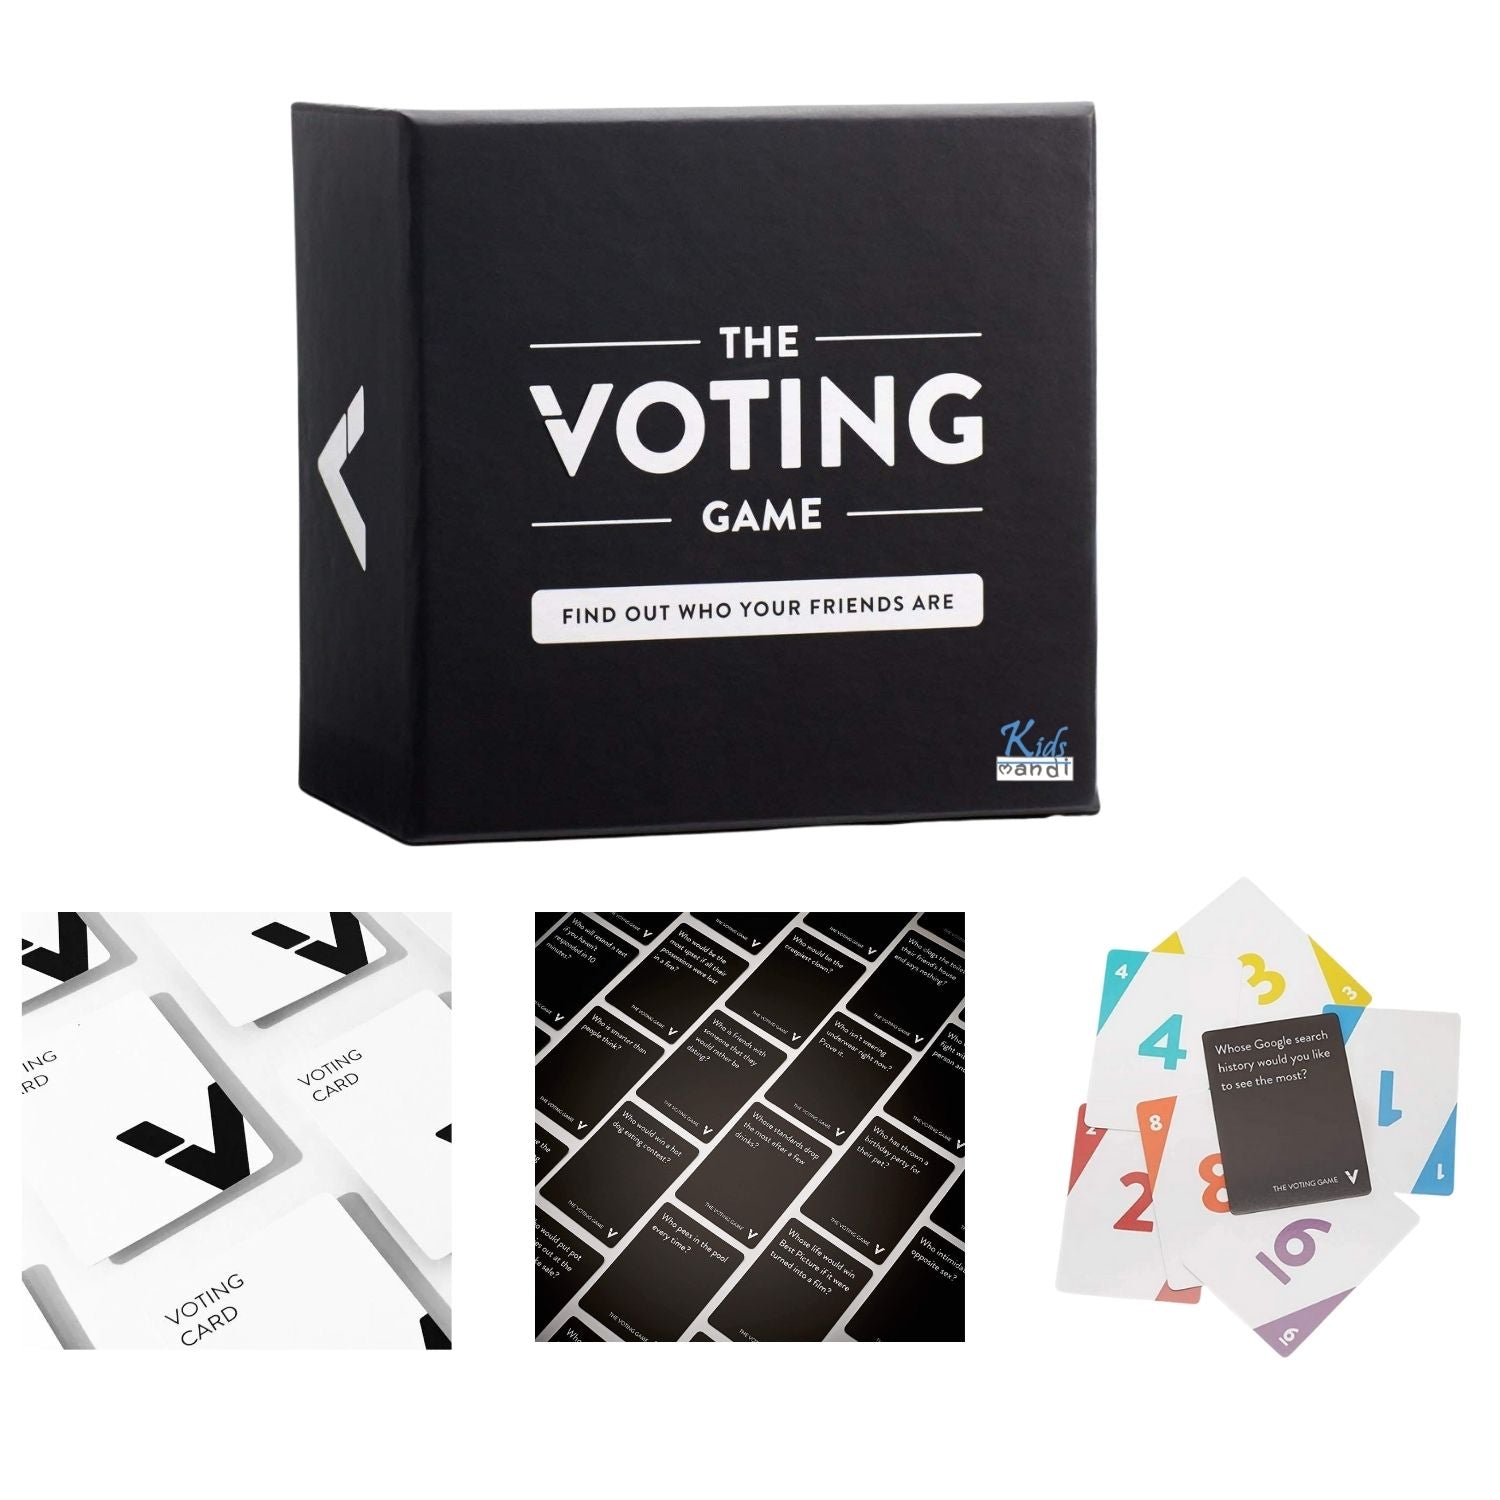 KIDS MANDI - The voting game - interactive and fun activity